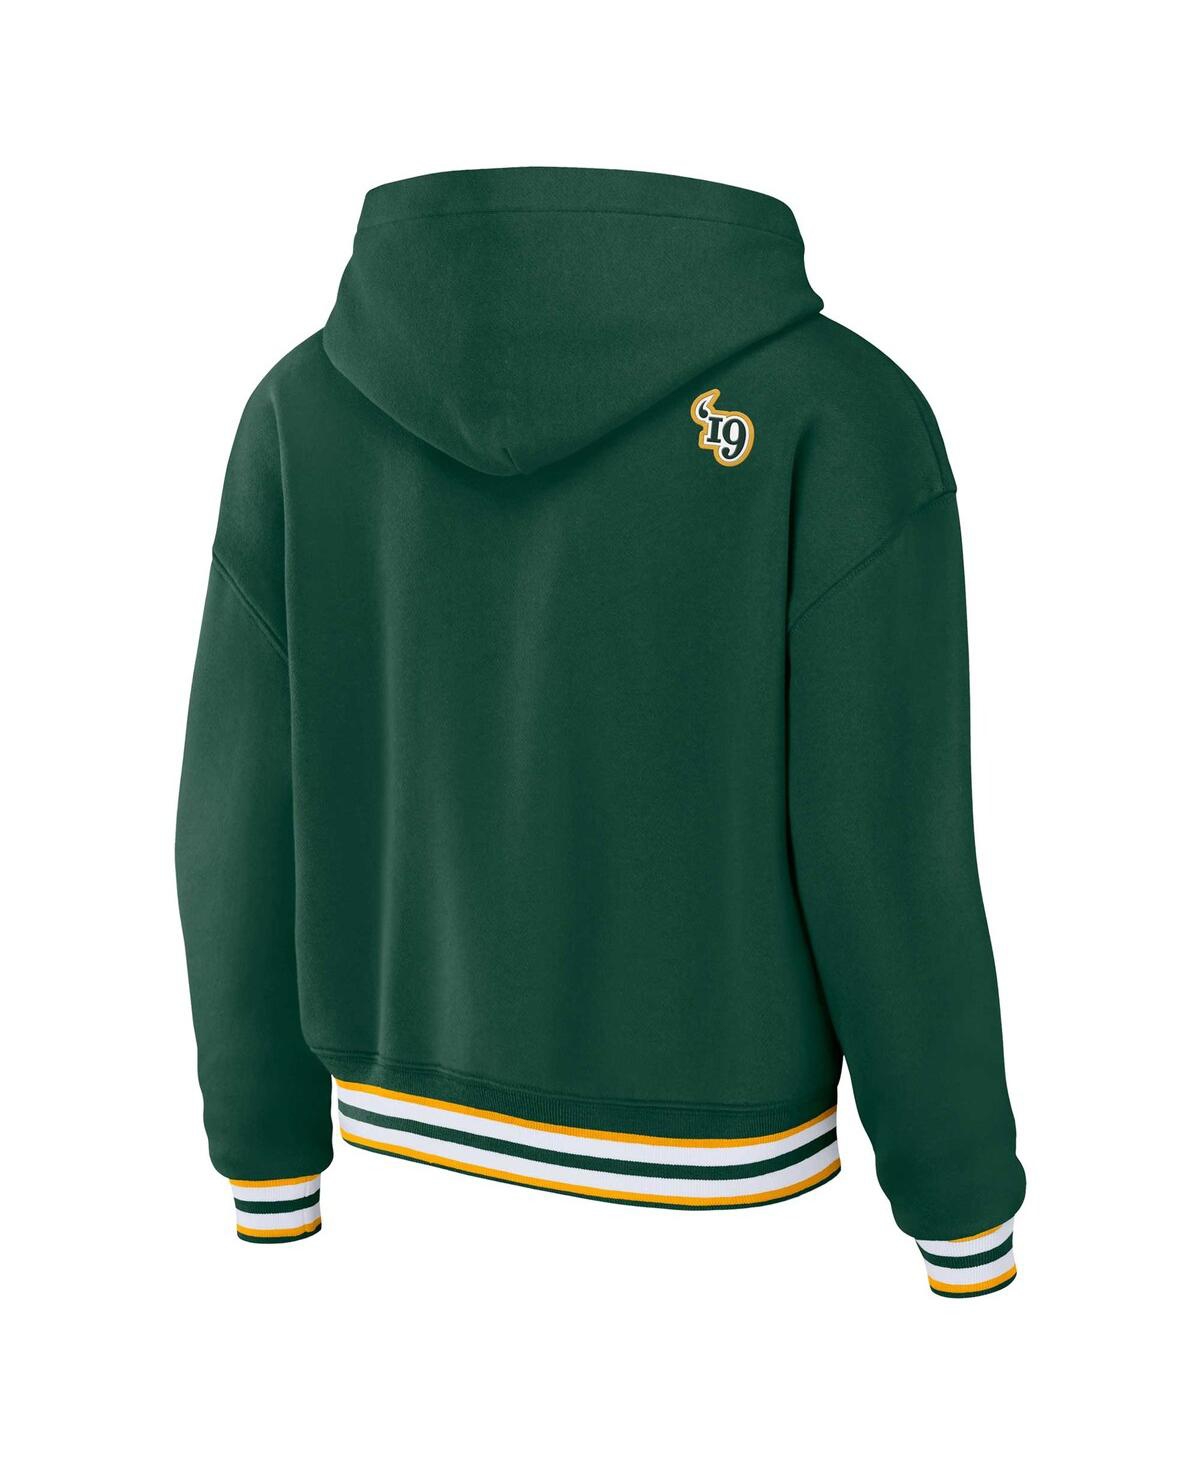 Shop Wear By Erin Andrews Women's  Green Green Bay Packers Plus Size Lace-up Pullover Hoodie